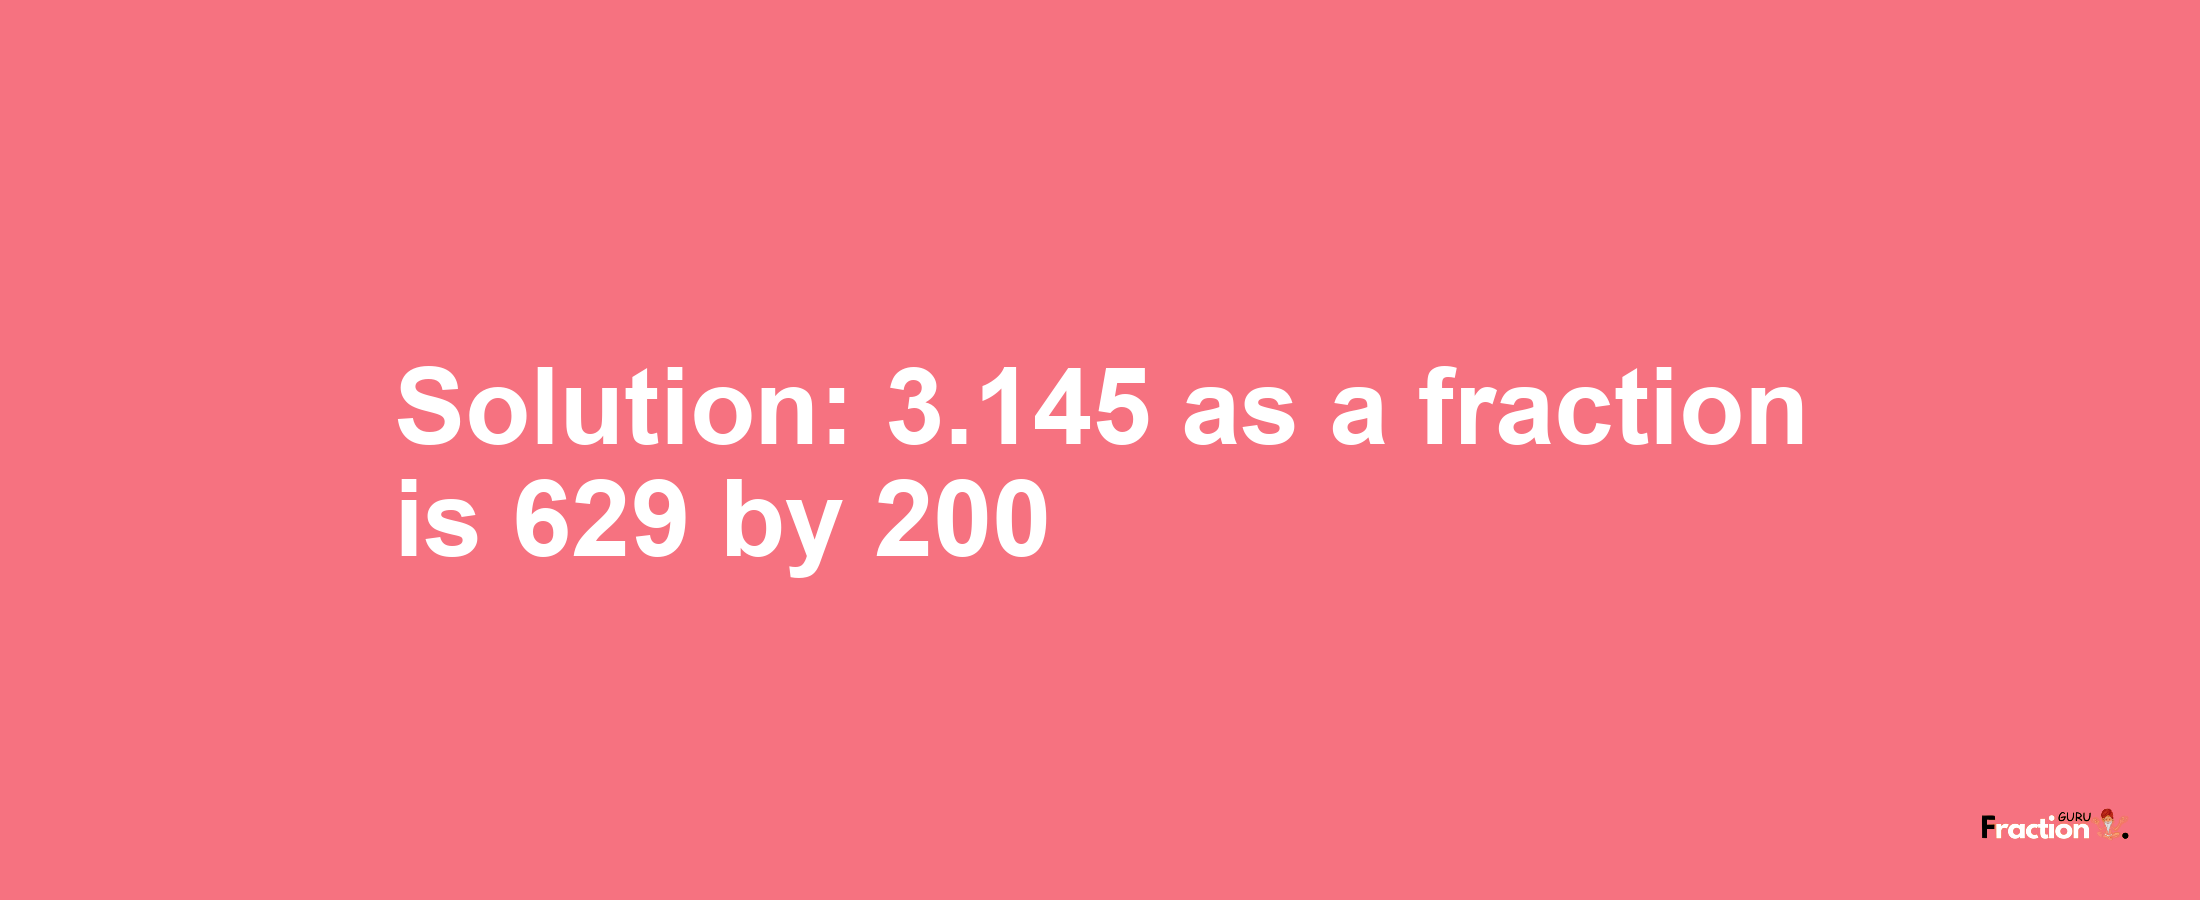 Solution:3.145 as a fraction is 629/200